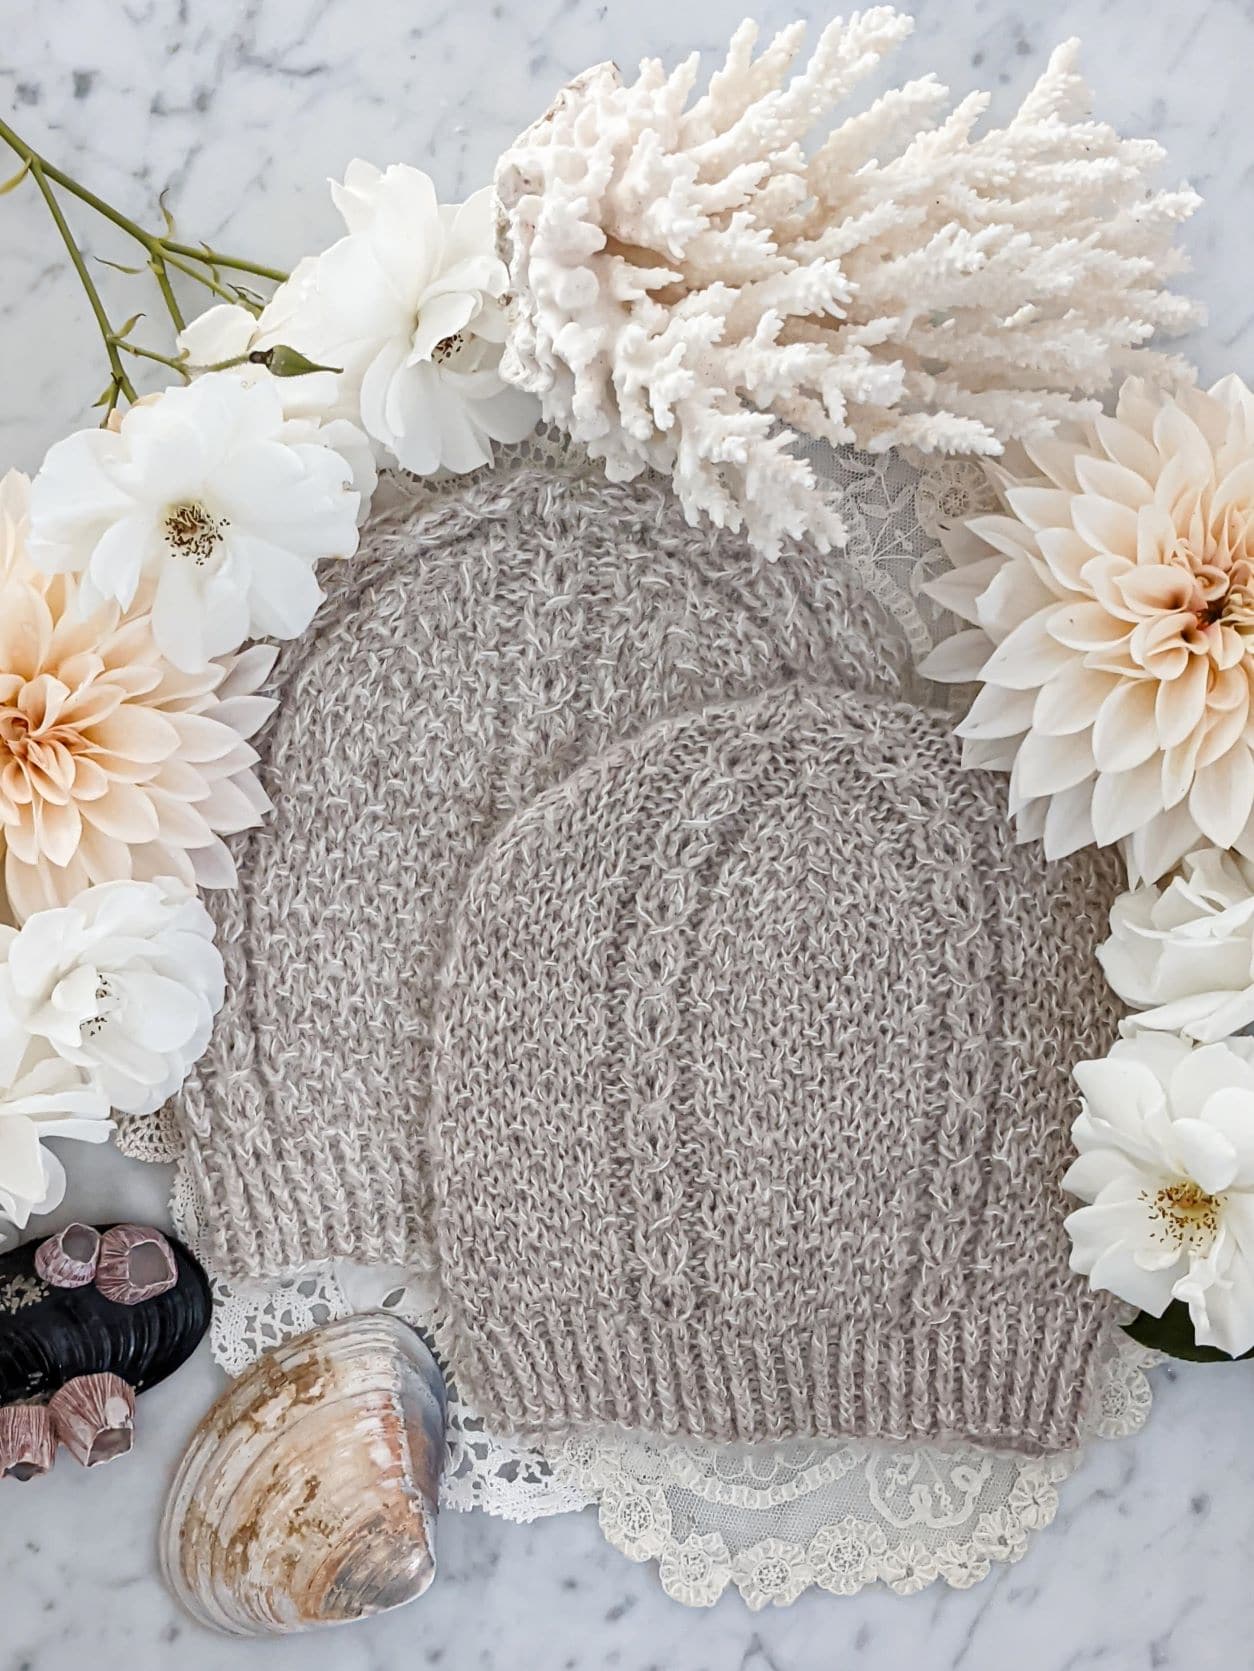 Two matching hats knit in fluffy tan yarn are laid flat on top of each other in a staggered fashion. They have seed stitch and columns of coin lace. They're surrounded by peach dahlias, white roses, two seashells, and spiky white coral.